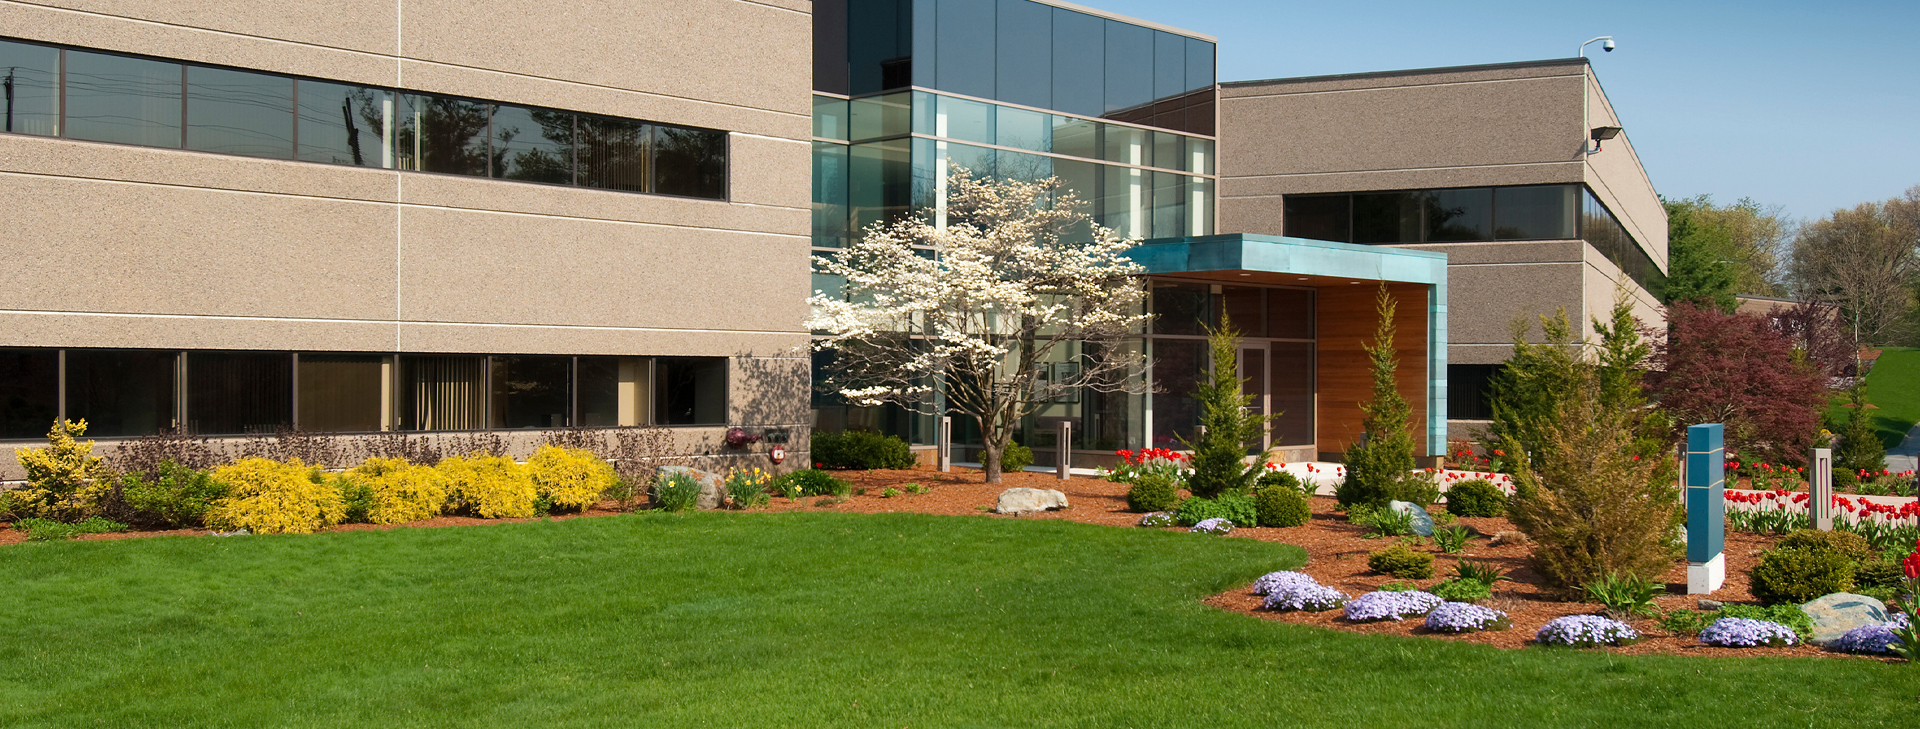 Commercial & Multifamily Property
Maintenance and Landscaping